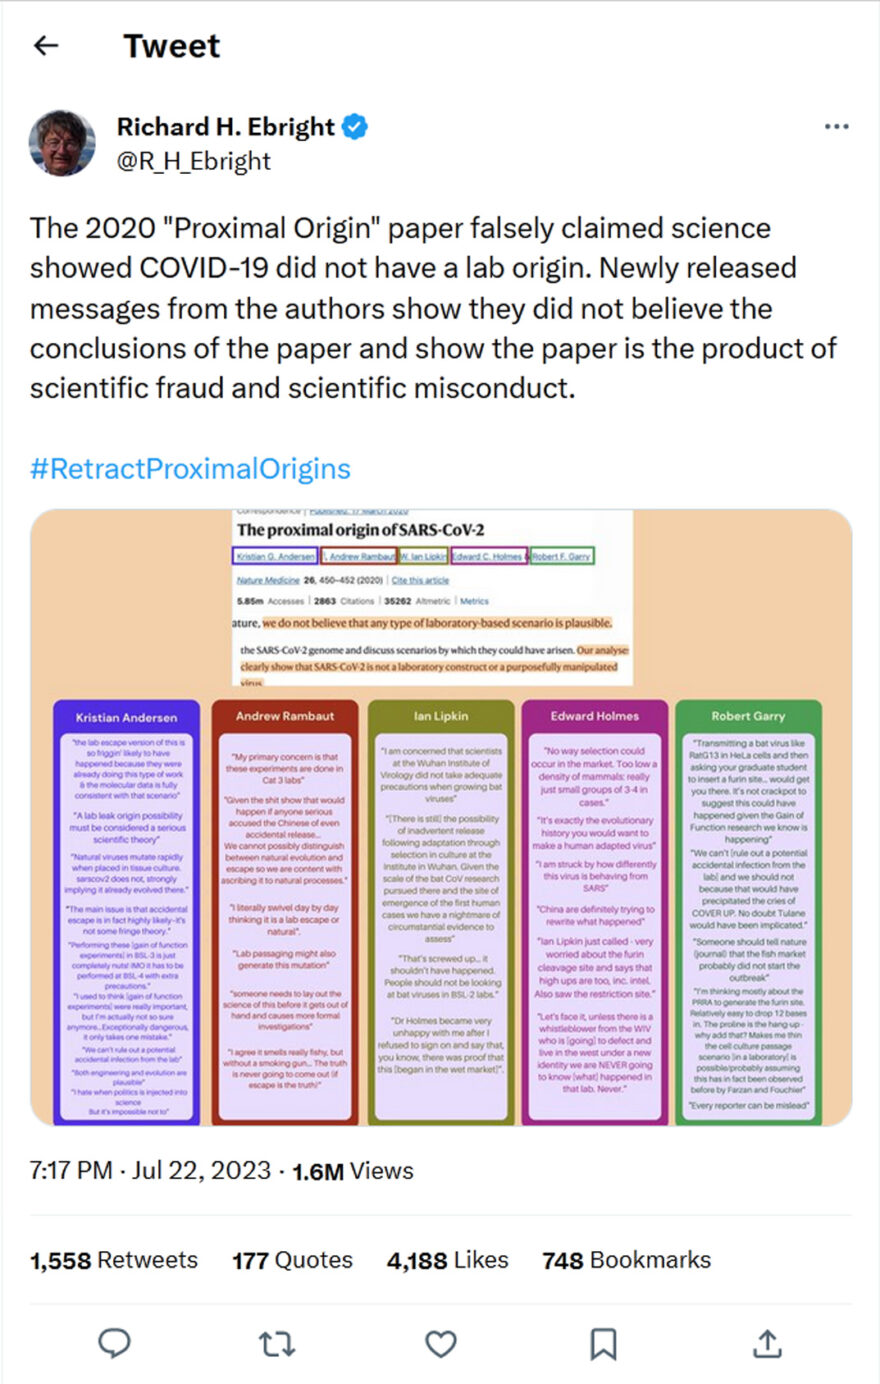 Richard H. Ebright-tweet-22July2023-The 2020 Proximal Origin paper falsely claimed science showed COVID-19 did not have a lab origin